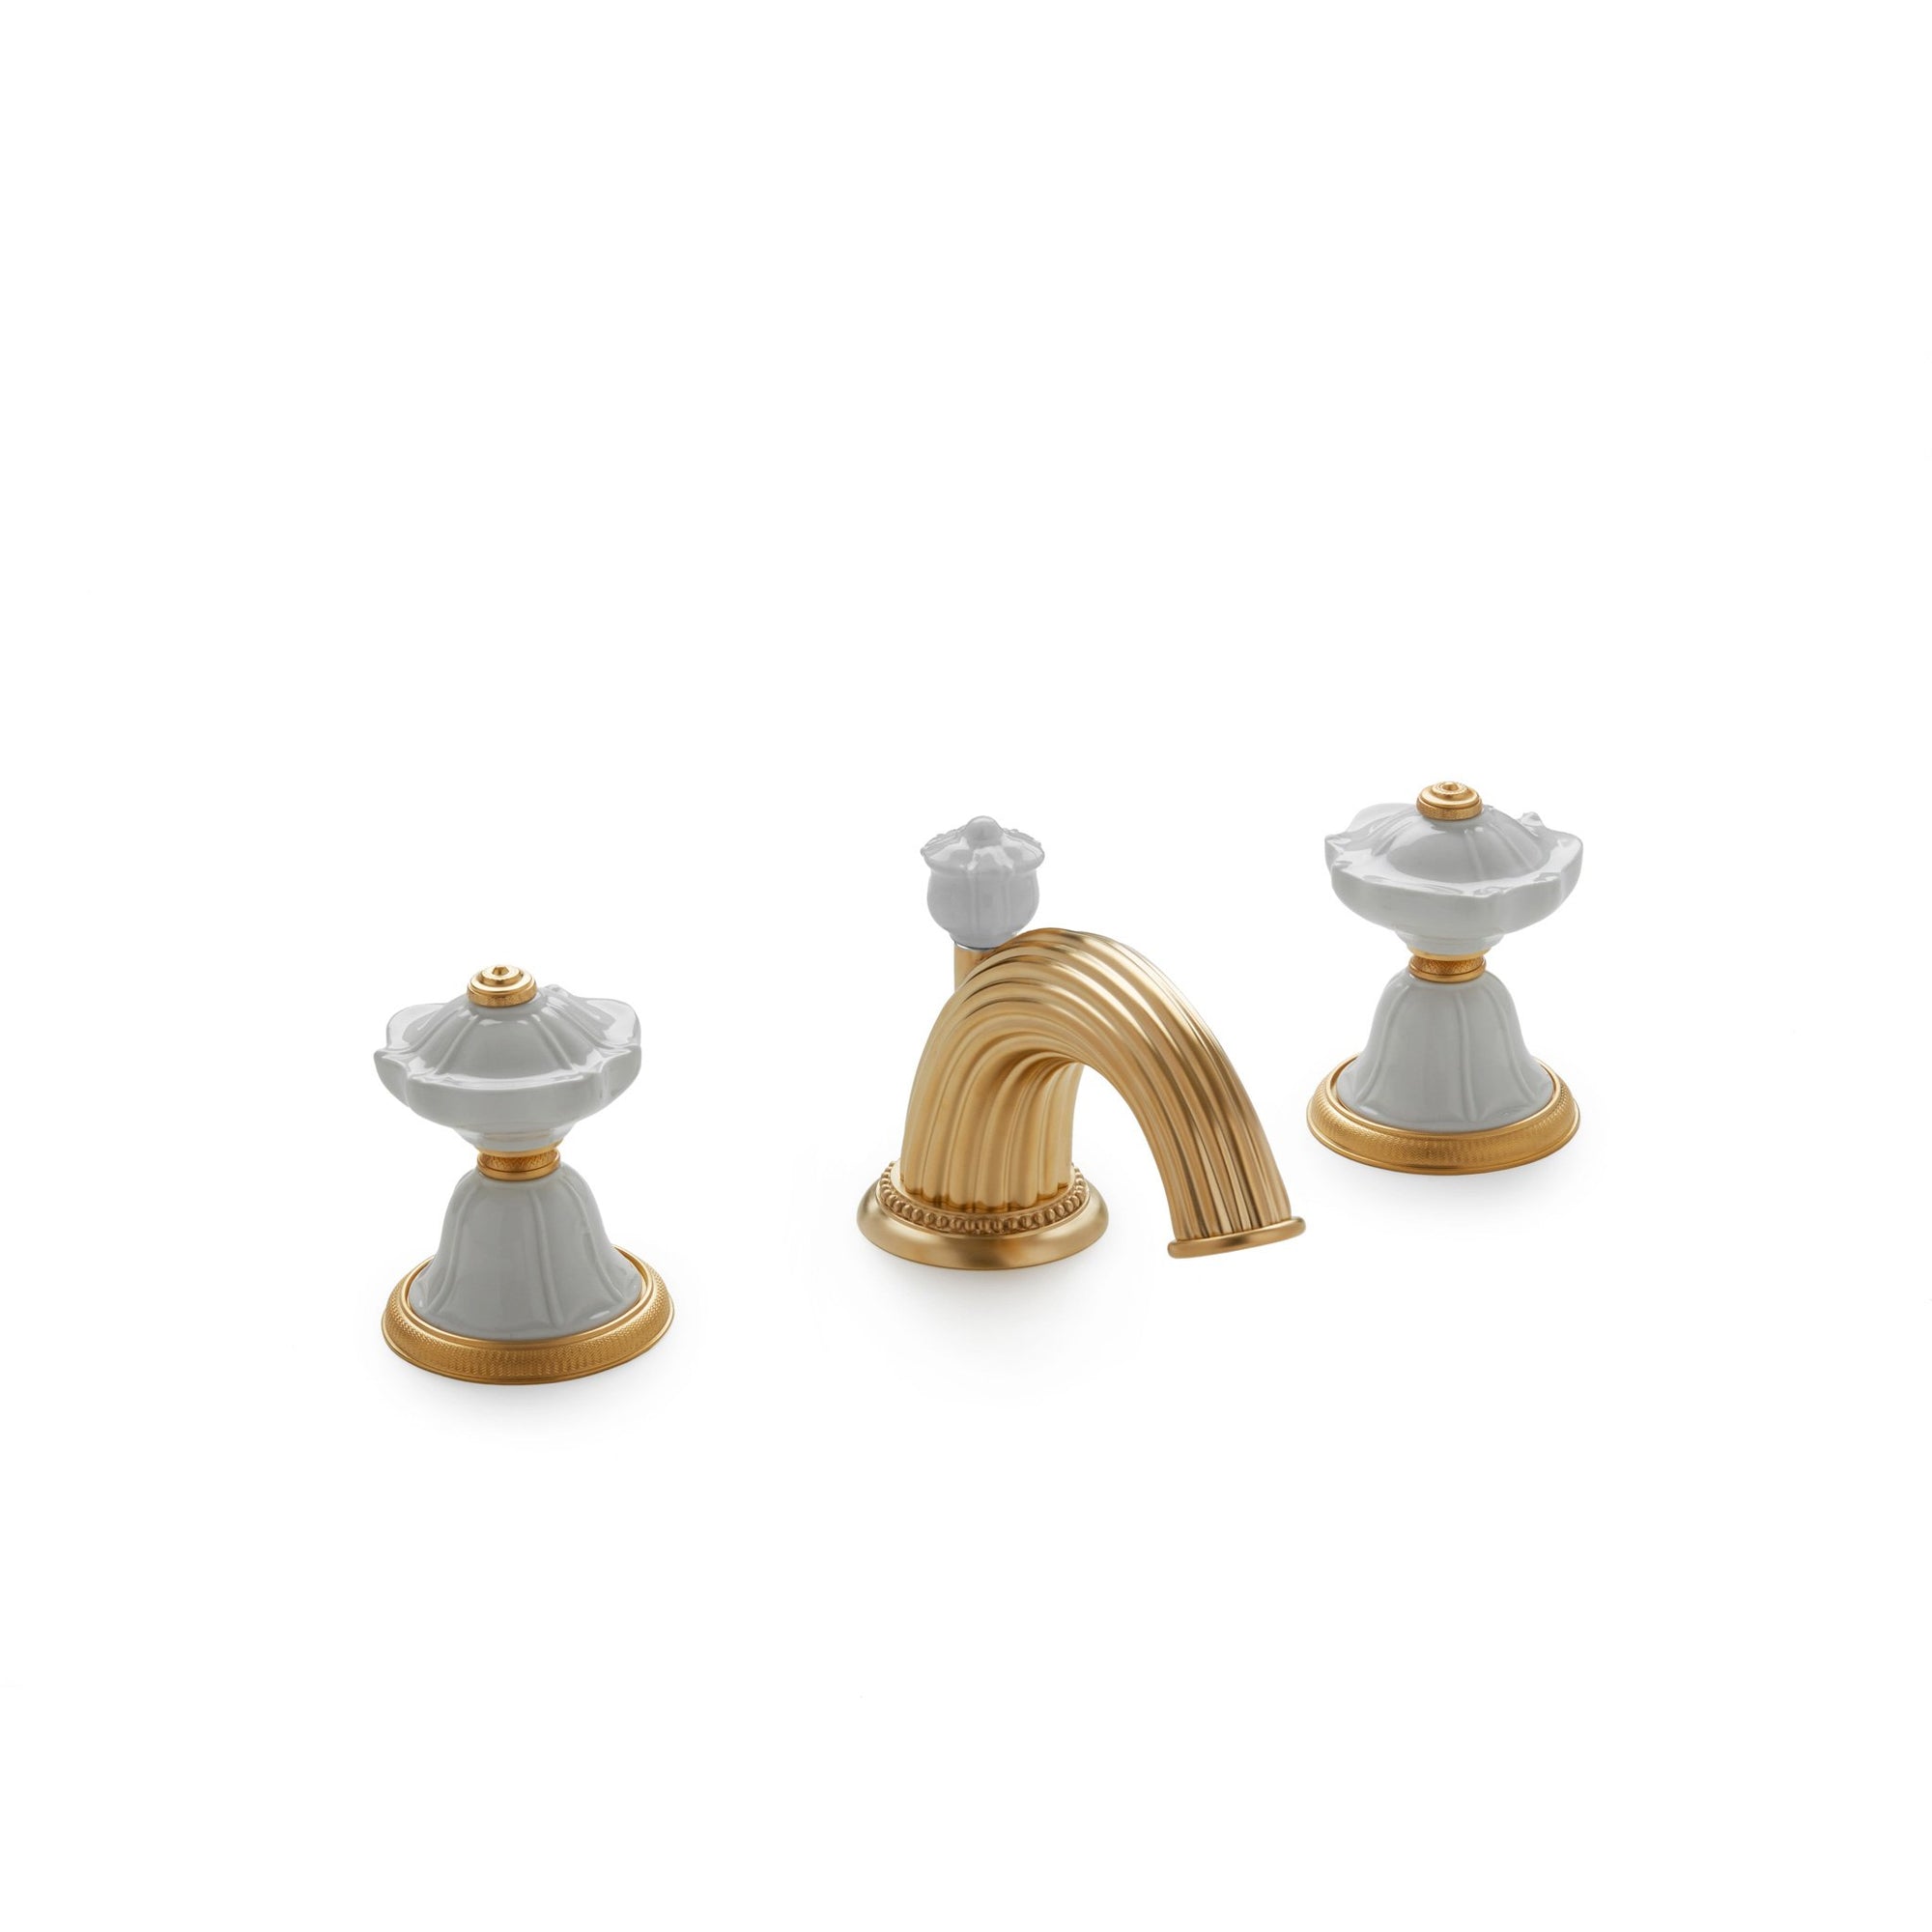 1097BSN813-03WH-GP Sherle Wagner International Scalloped Ceramic Knob Faucet Set in Gold Plate metal finish with White Glaze inserts